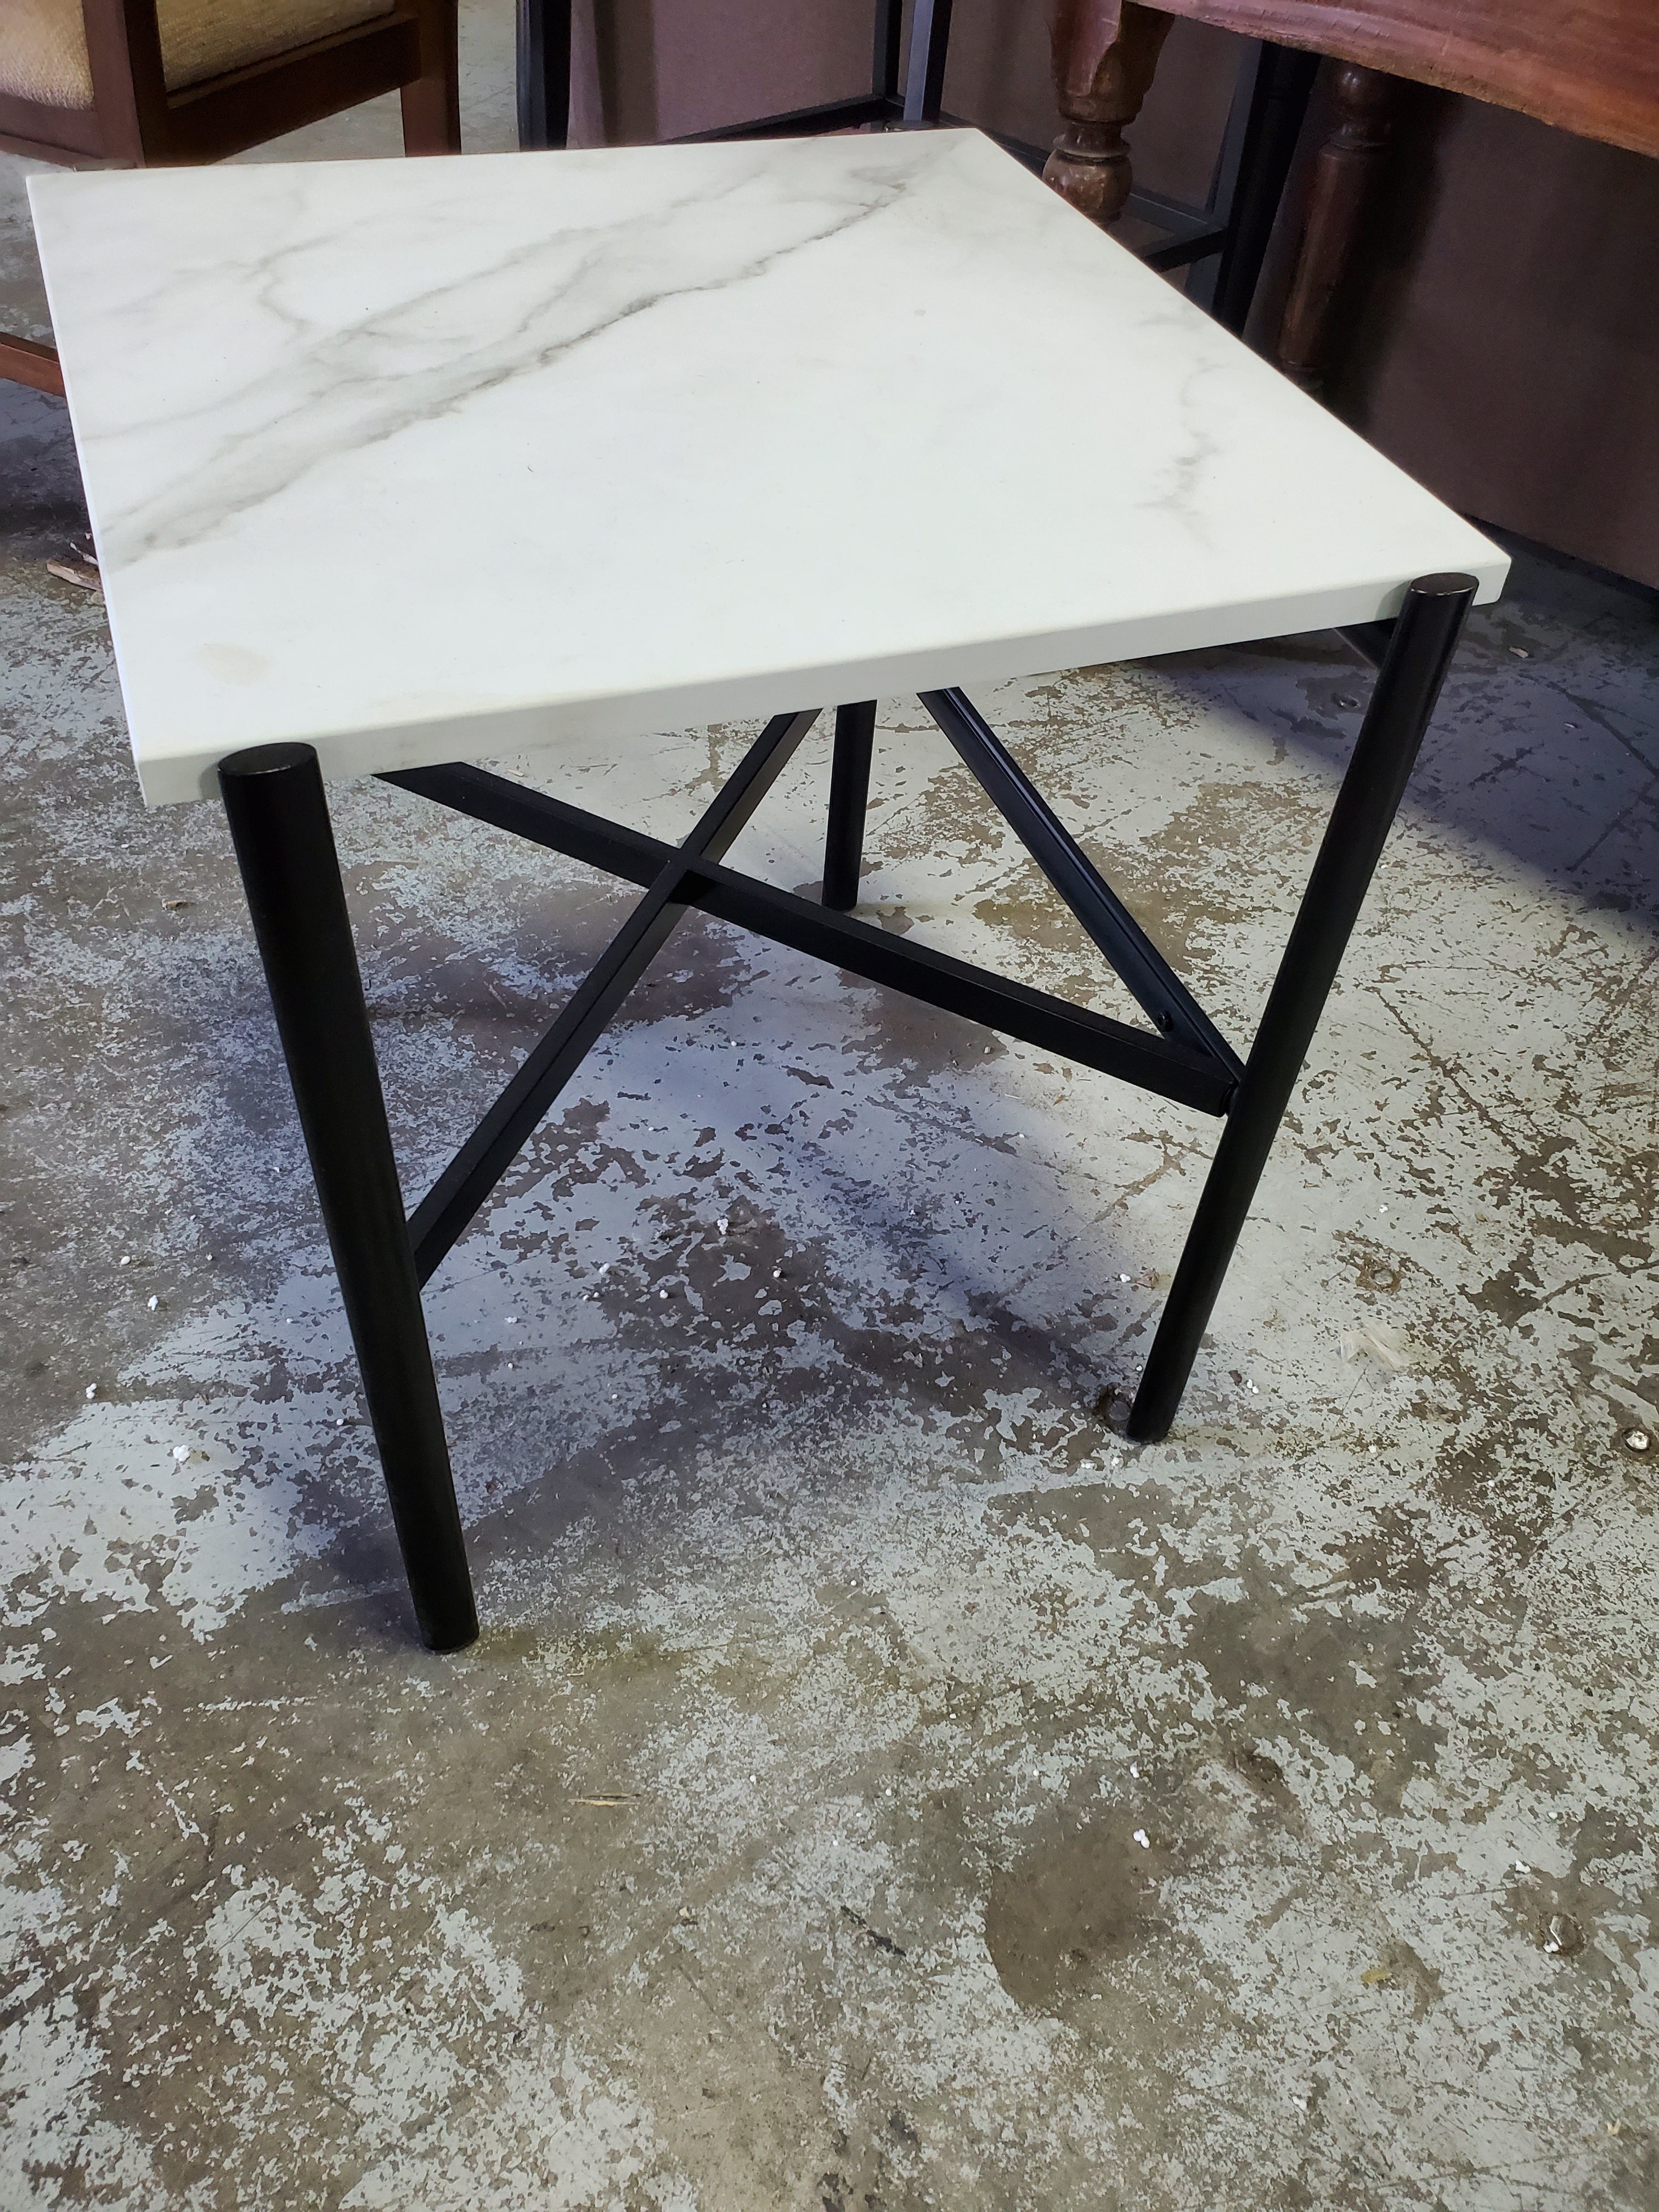 Remick End Table